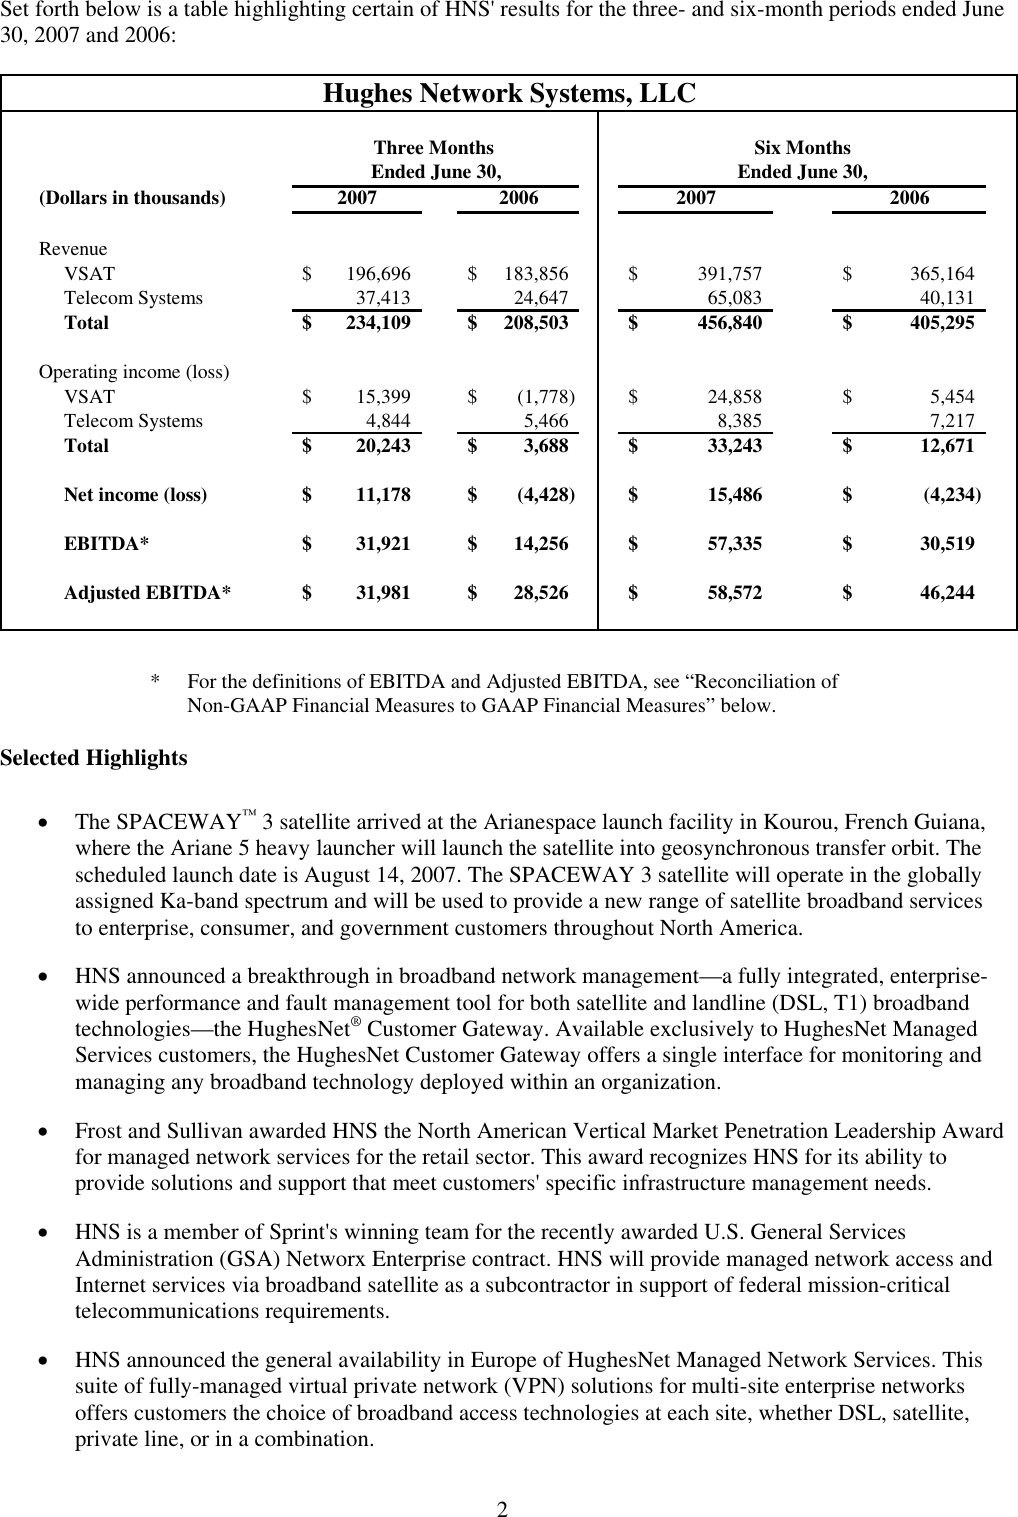 Page 2 of 12 - Q2-07 Earnings Release  08-09-07 08 09 07